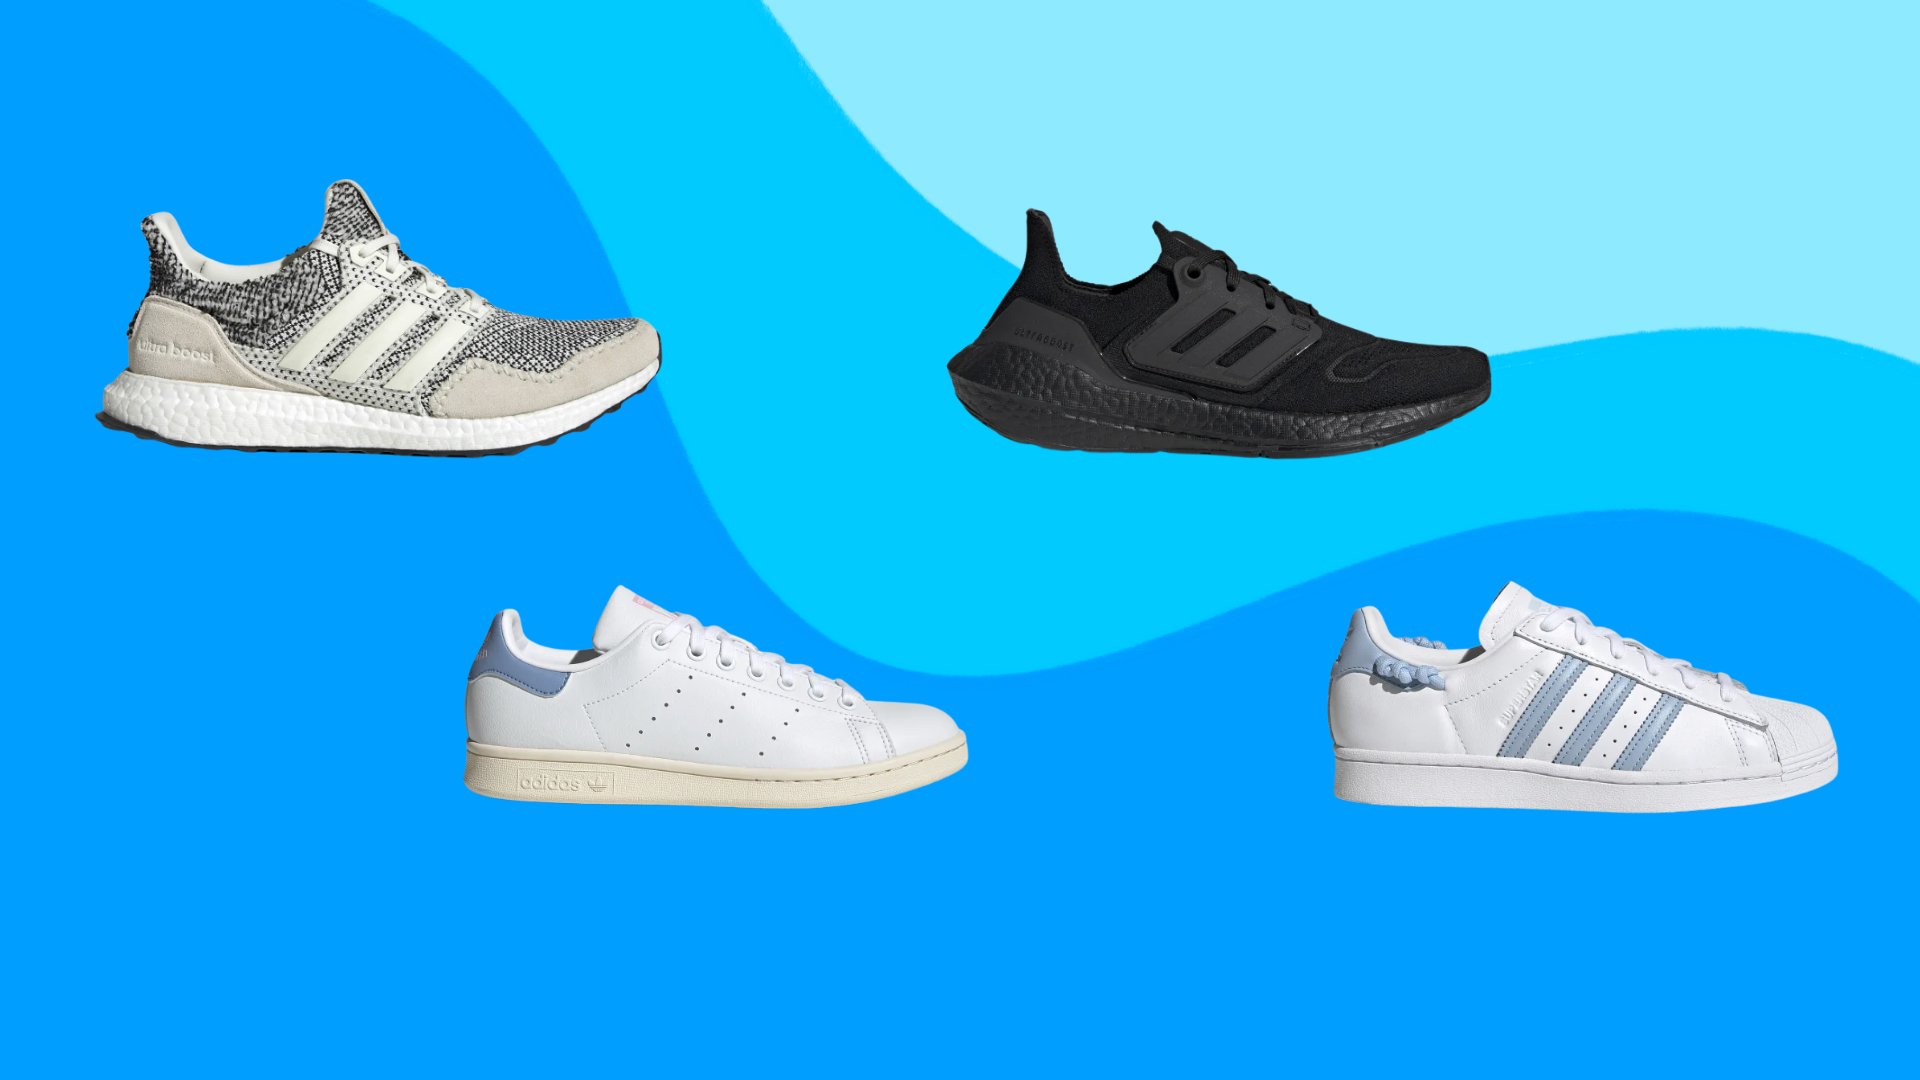 tocino Humedal informal Adidas sale: Members can save up to 40% on sneakers and apparel